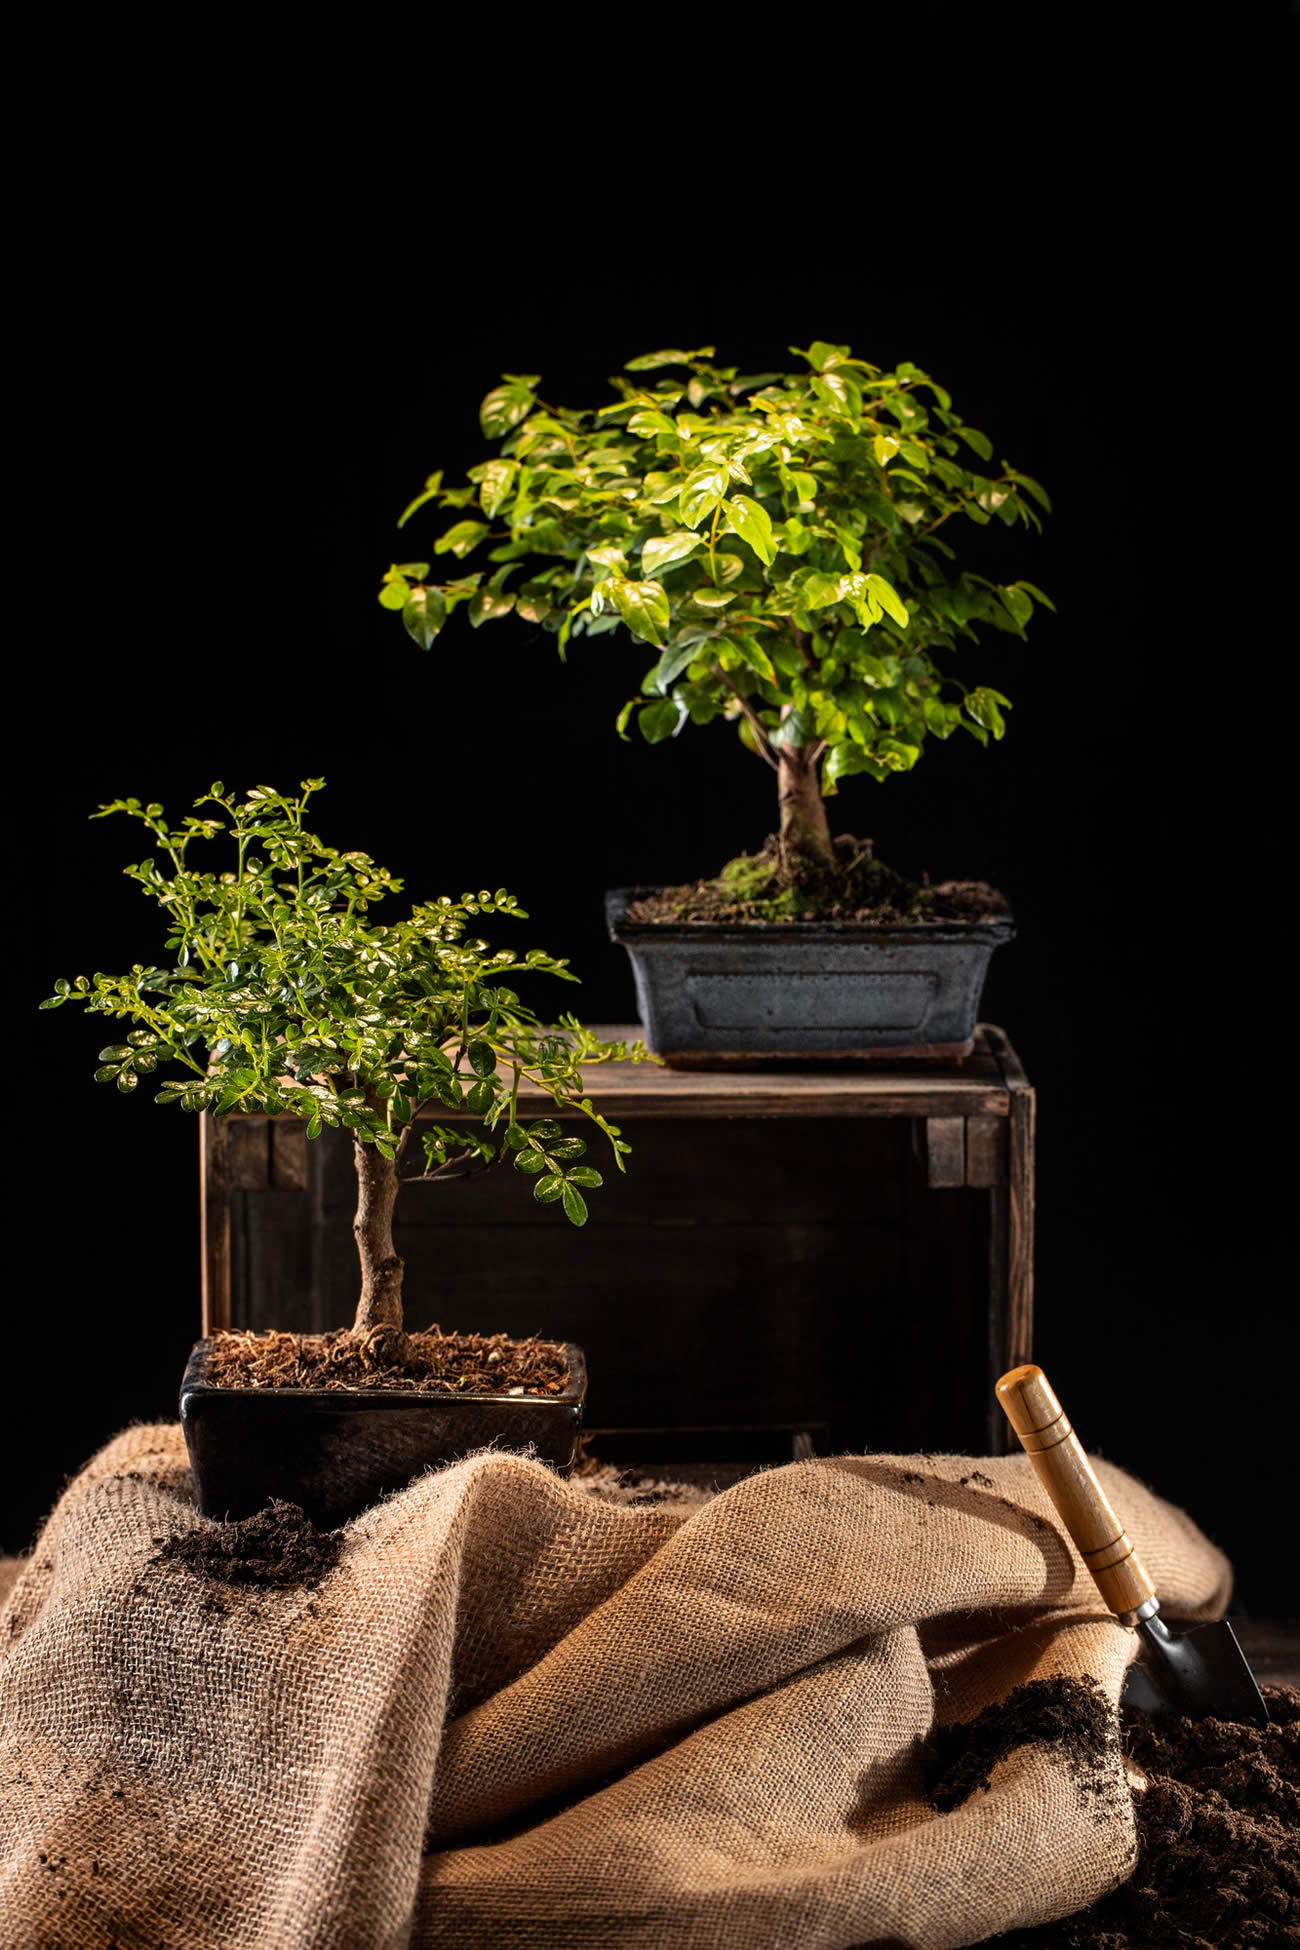 How To Look After A Bonsai Tree